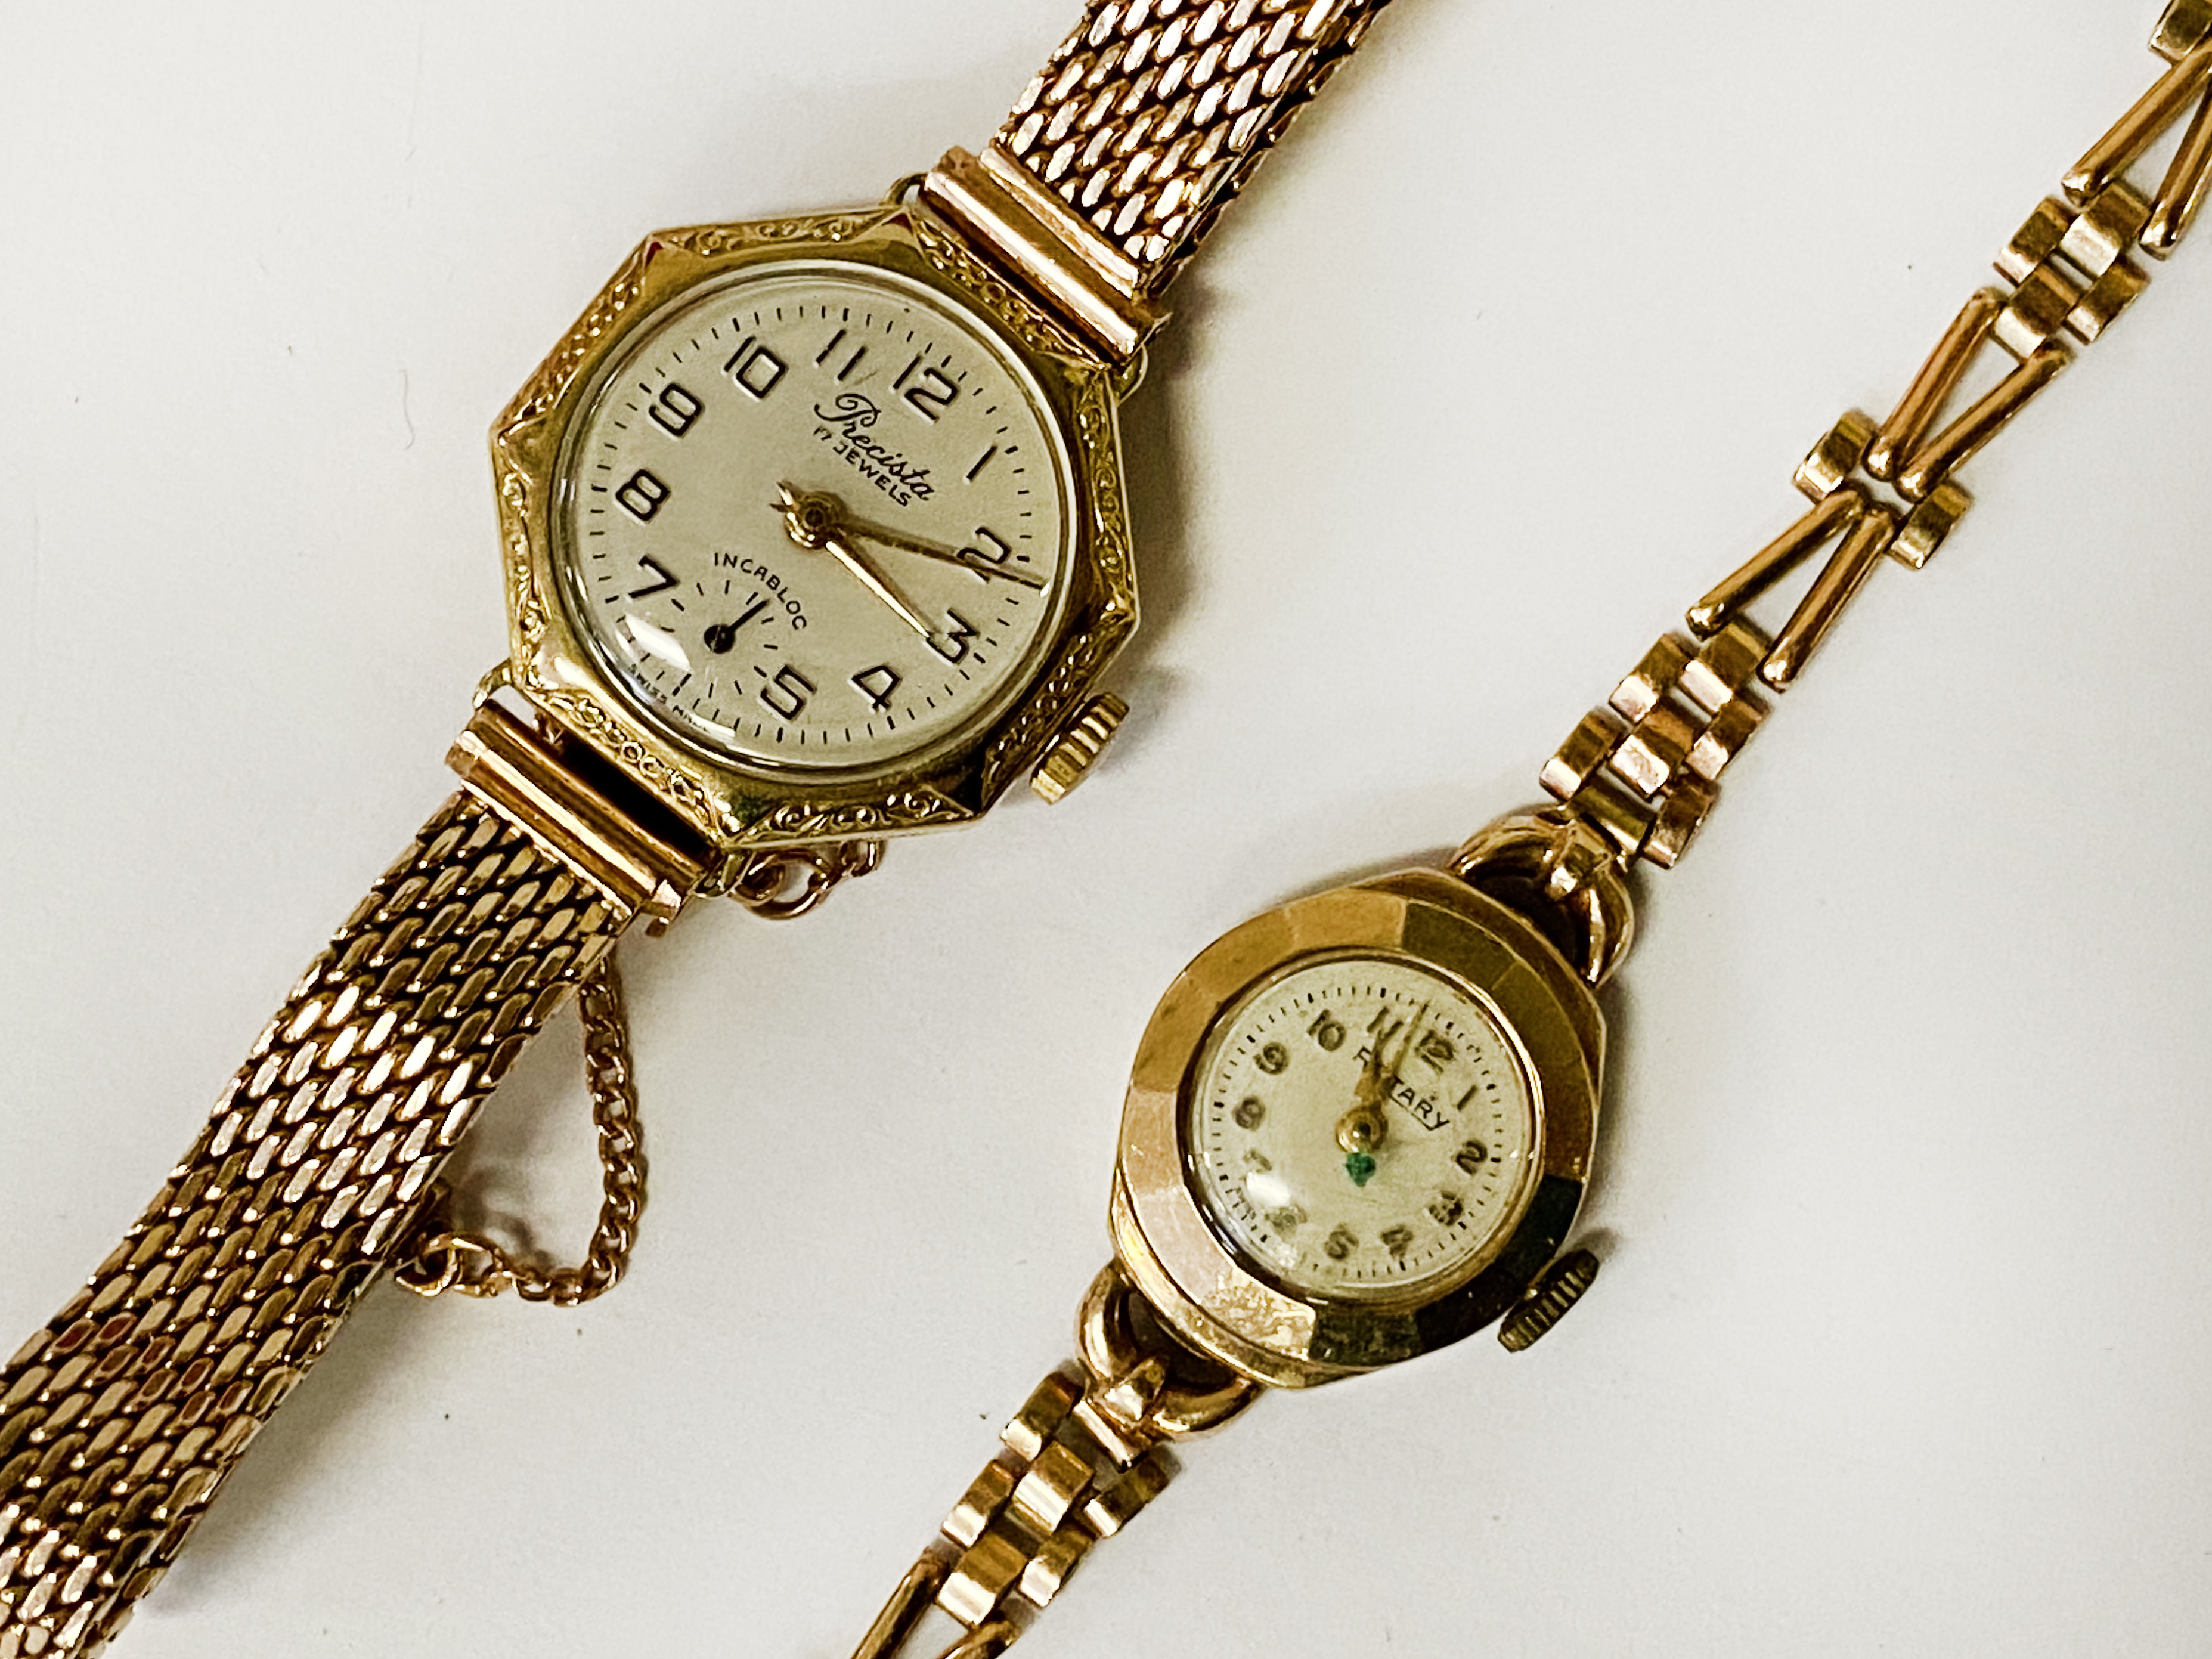 VINTAGE 14CT GOLD LADIES WRISTWATCH WITH ANOTHER VINTAGE 9CT GOLD LADIES WRISTWATCH - 36.7 GRAMS